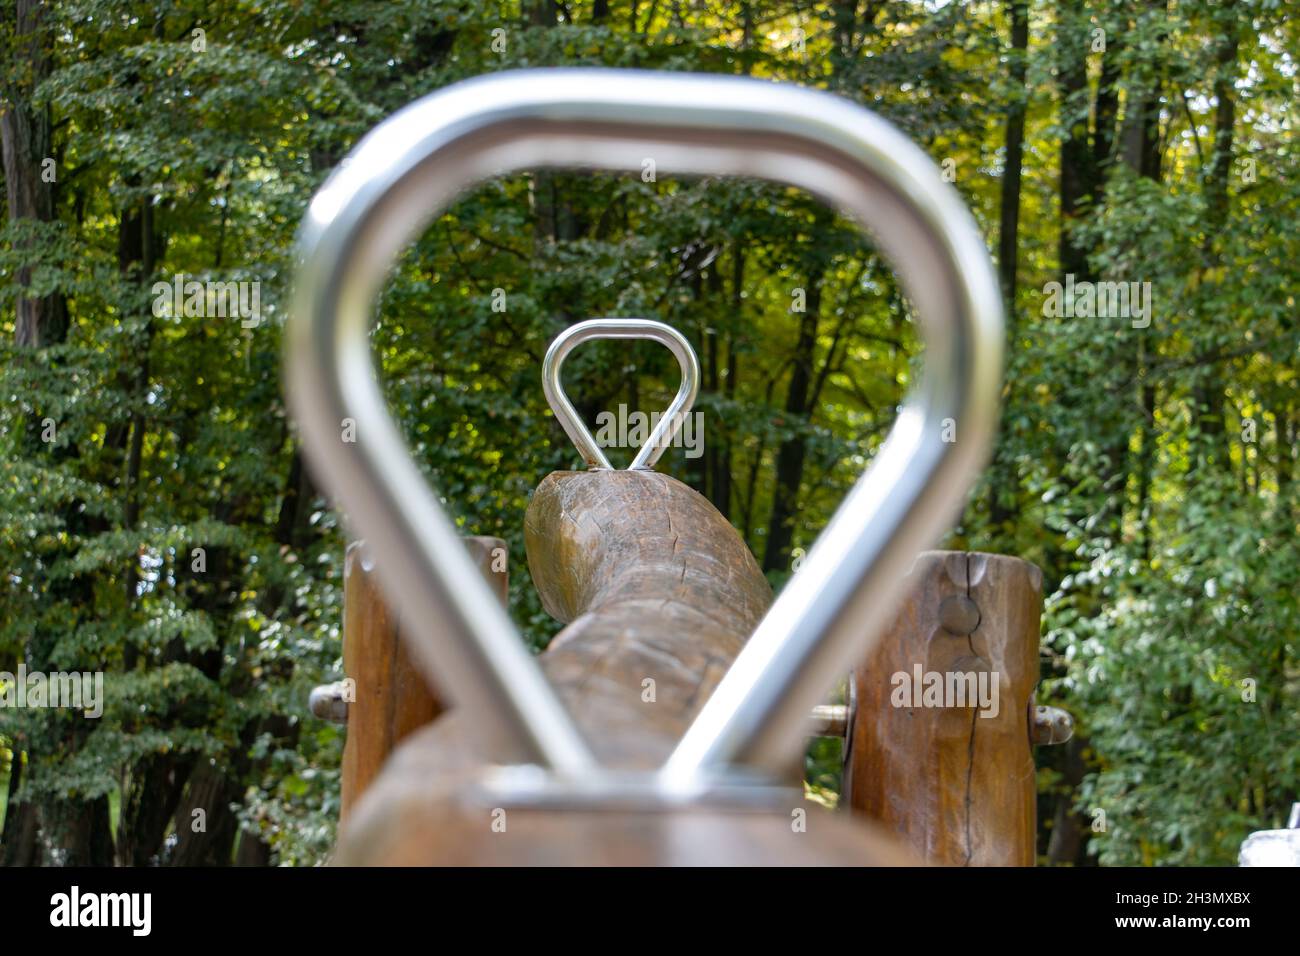 View through the handles of the swing, focused on the back handle Stock Photo